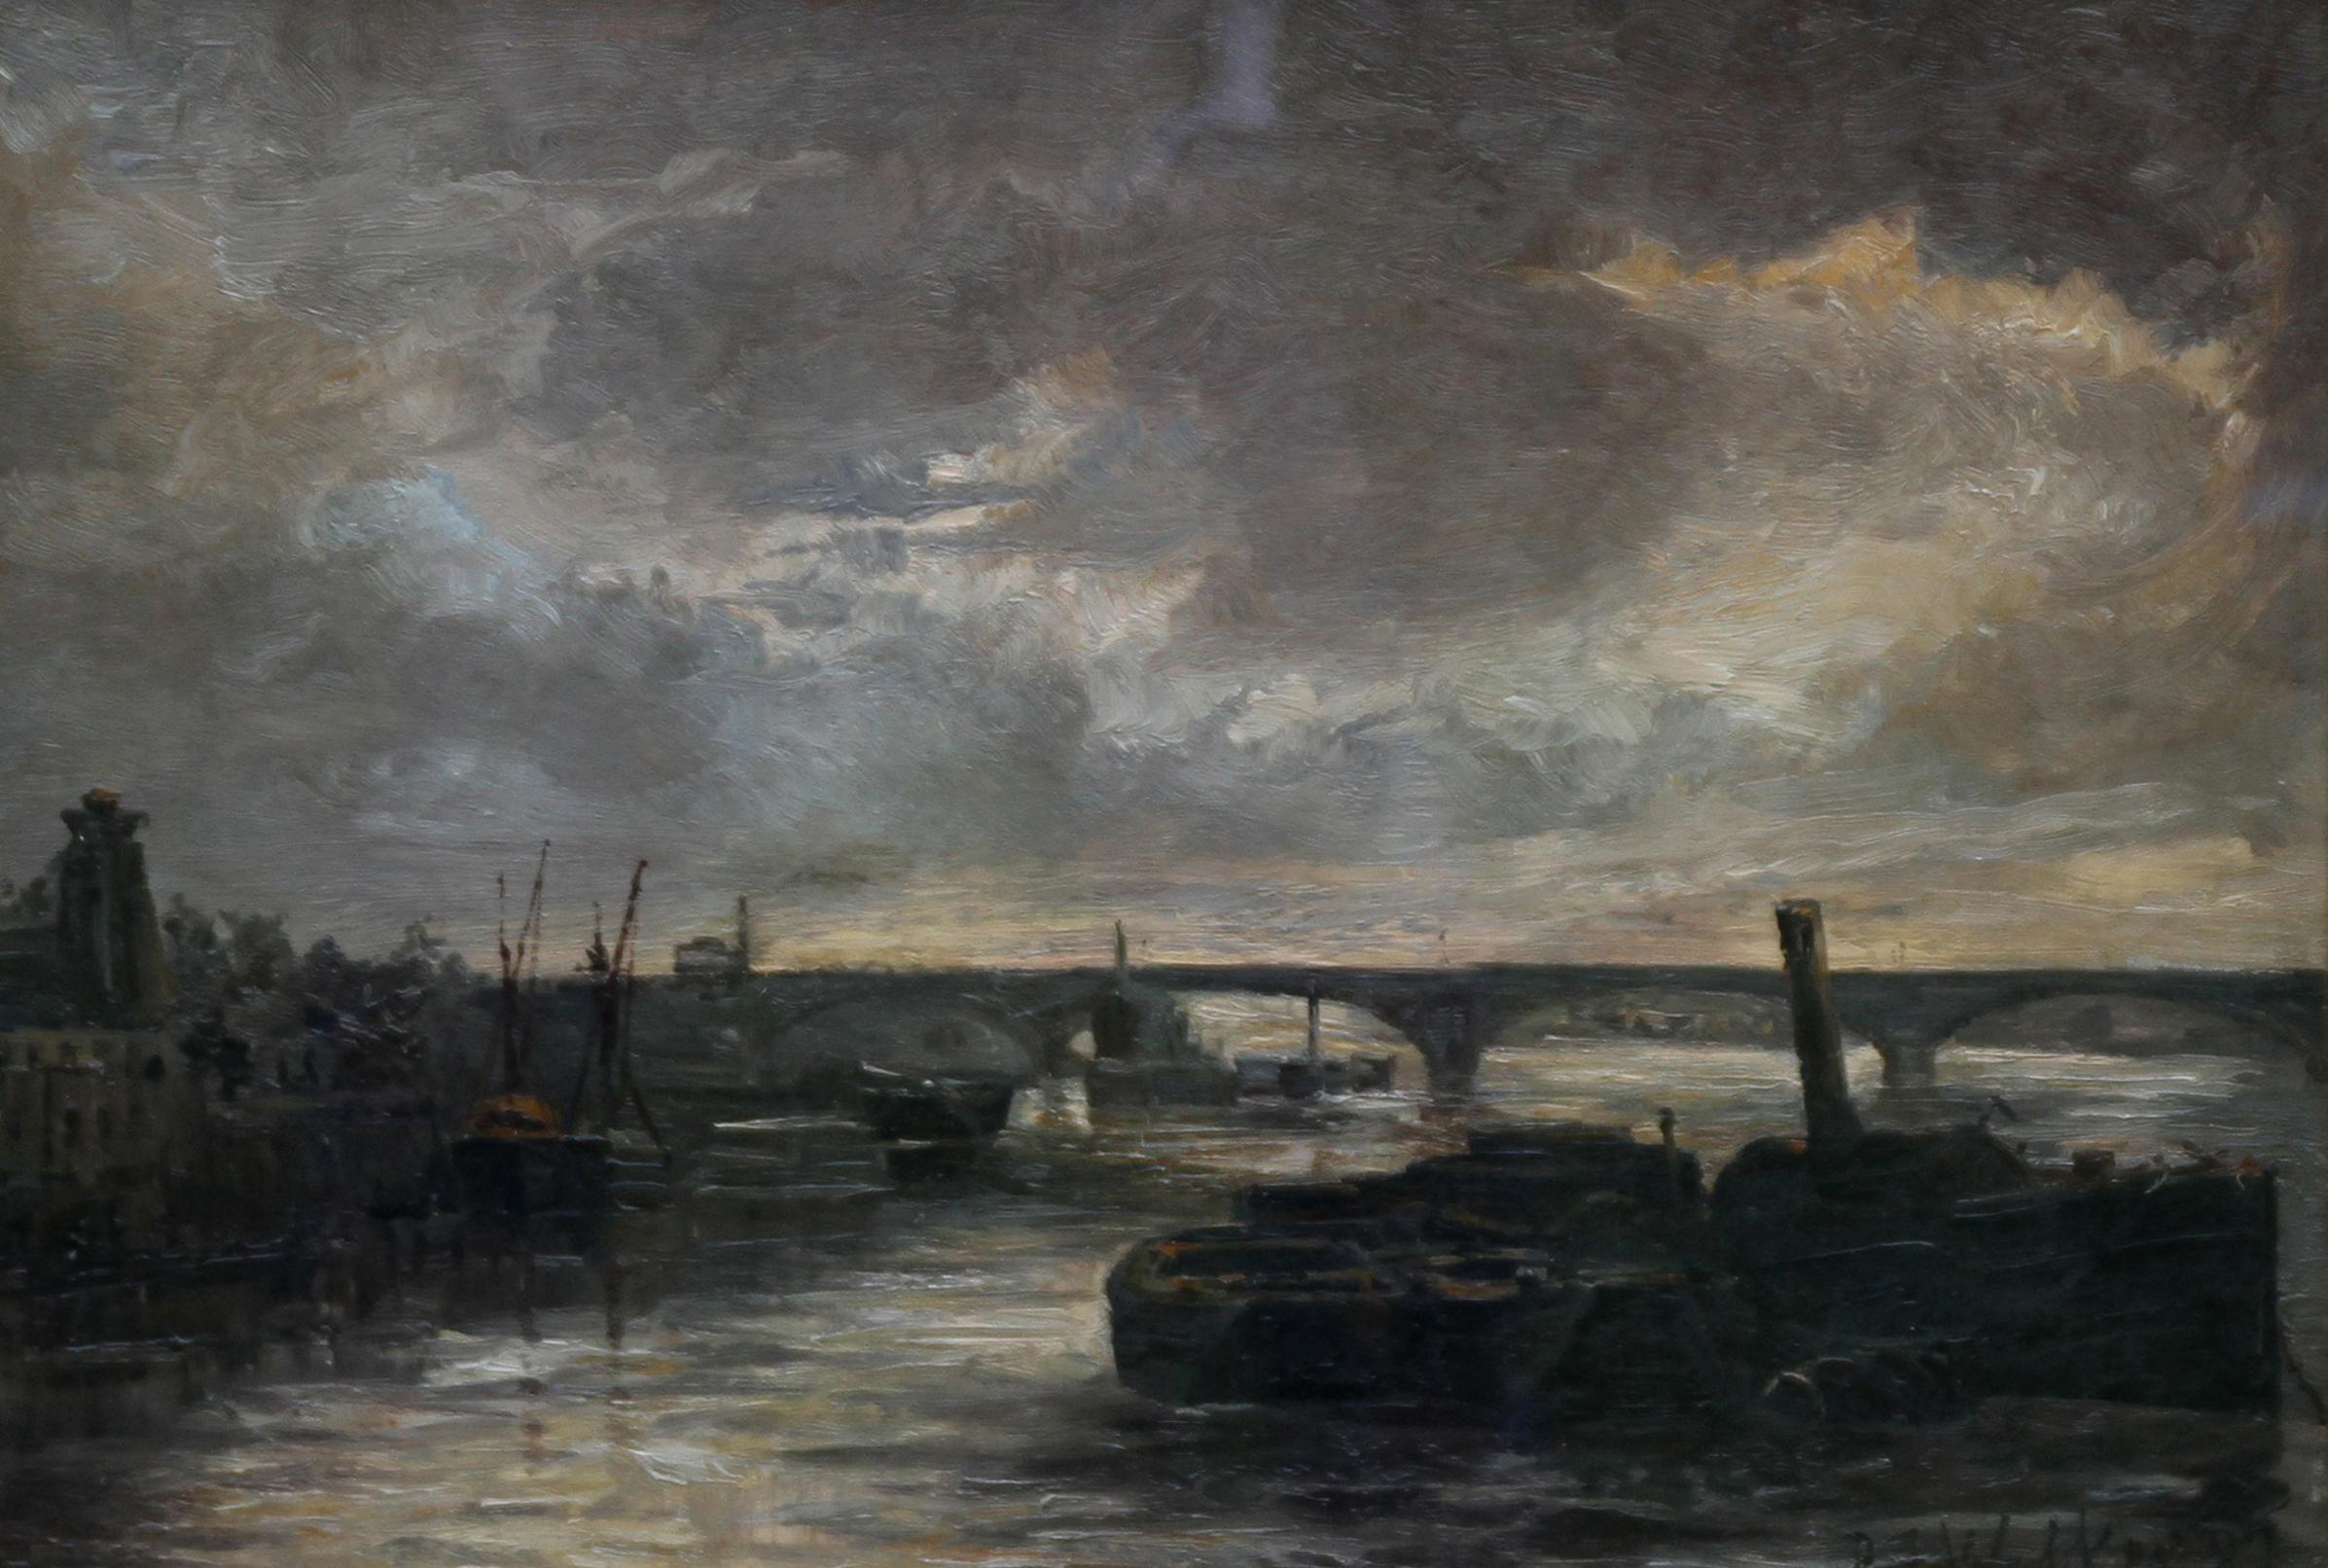 Thames at Battersea - British Impressionist art Victorian London oil painting  For Sale 4